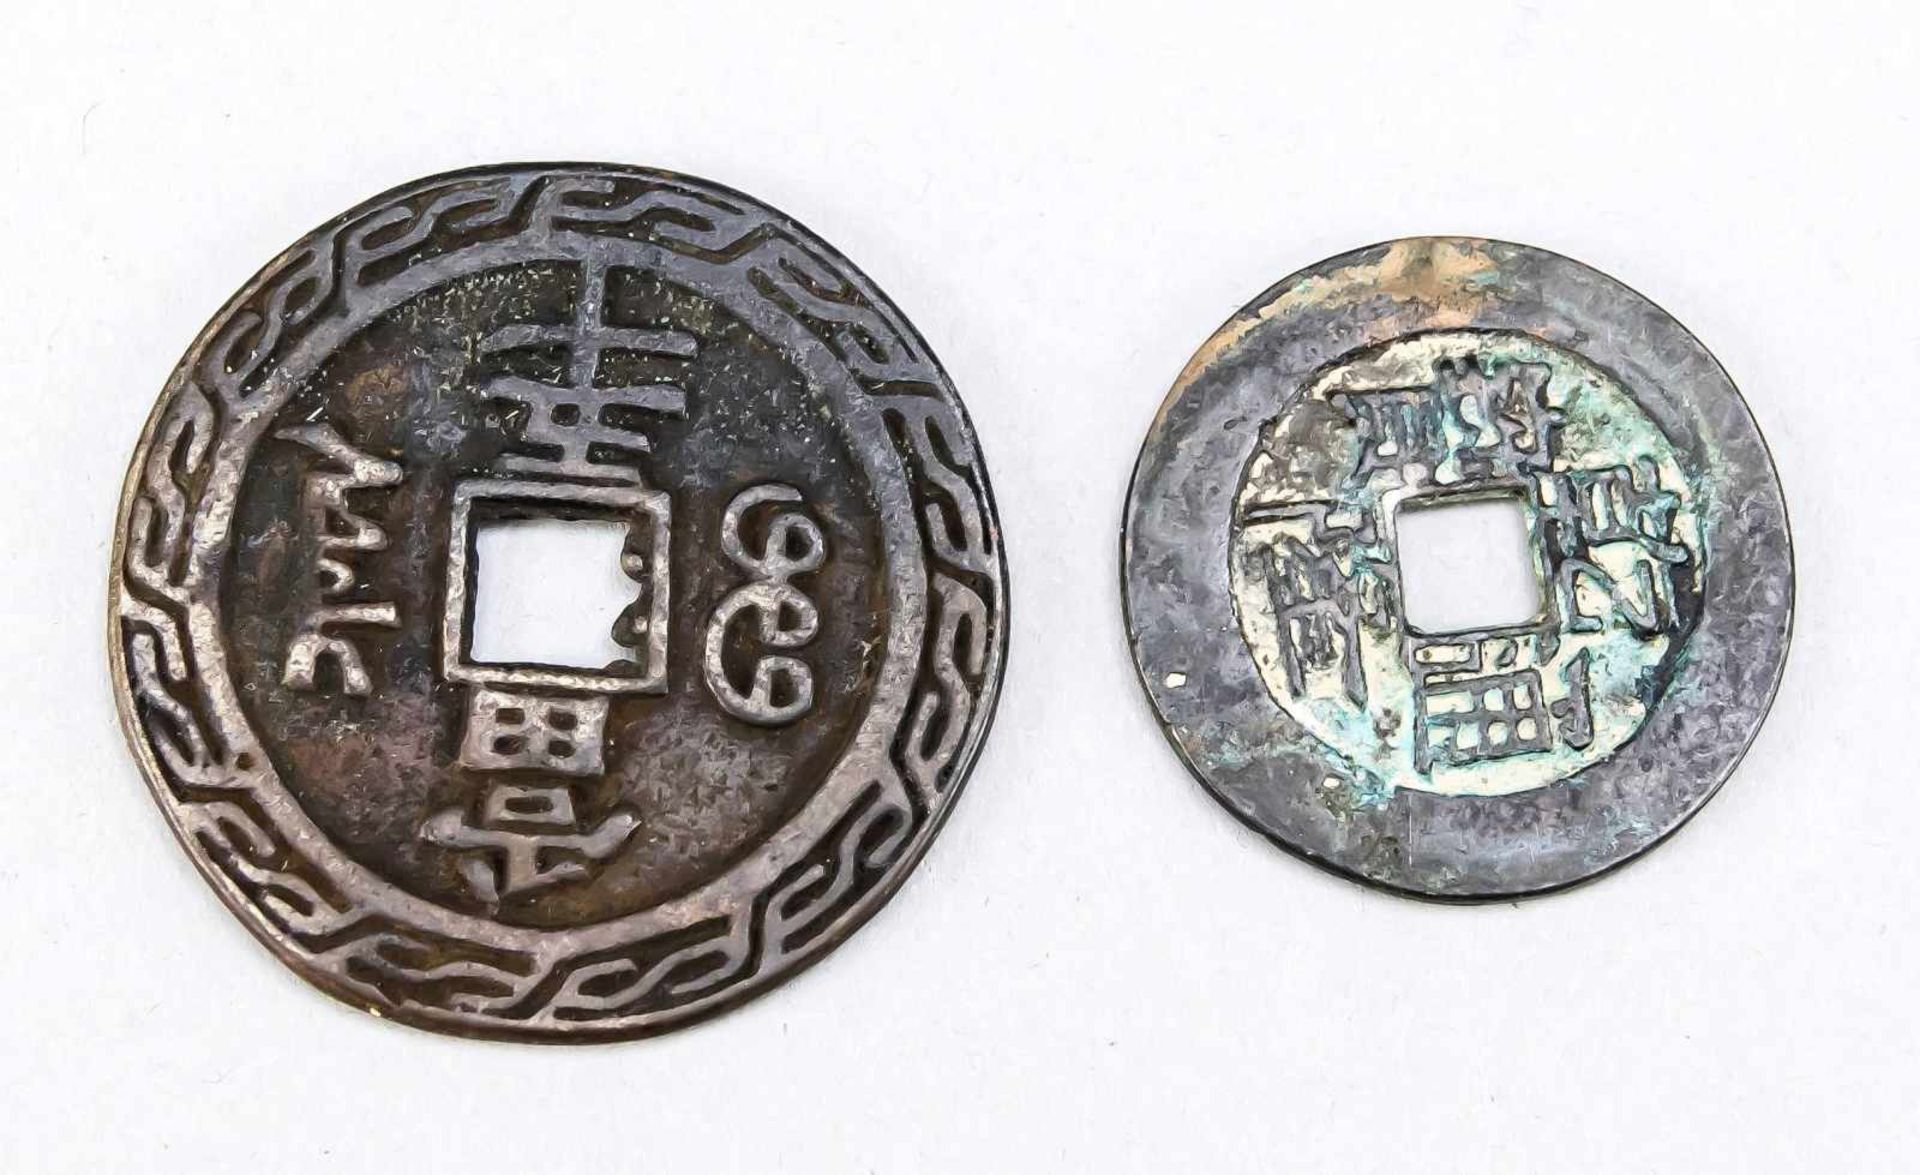 2 coin amulets, China, bronze. Round with square opening in the center, characters and